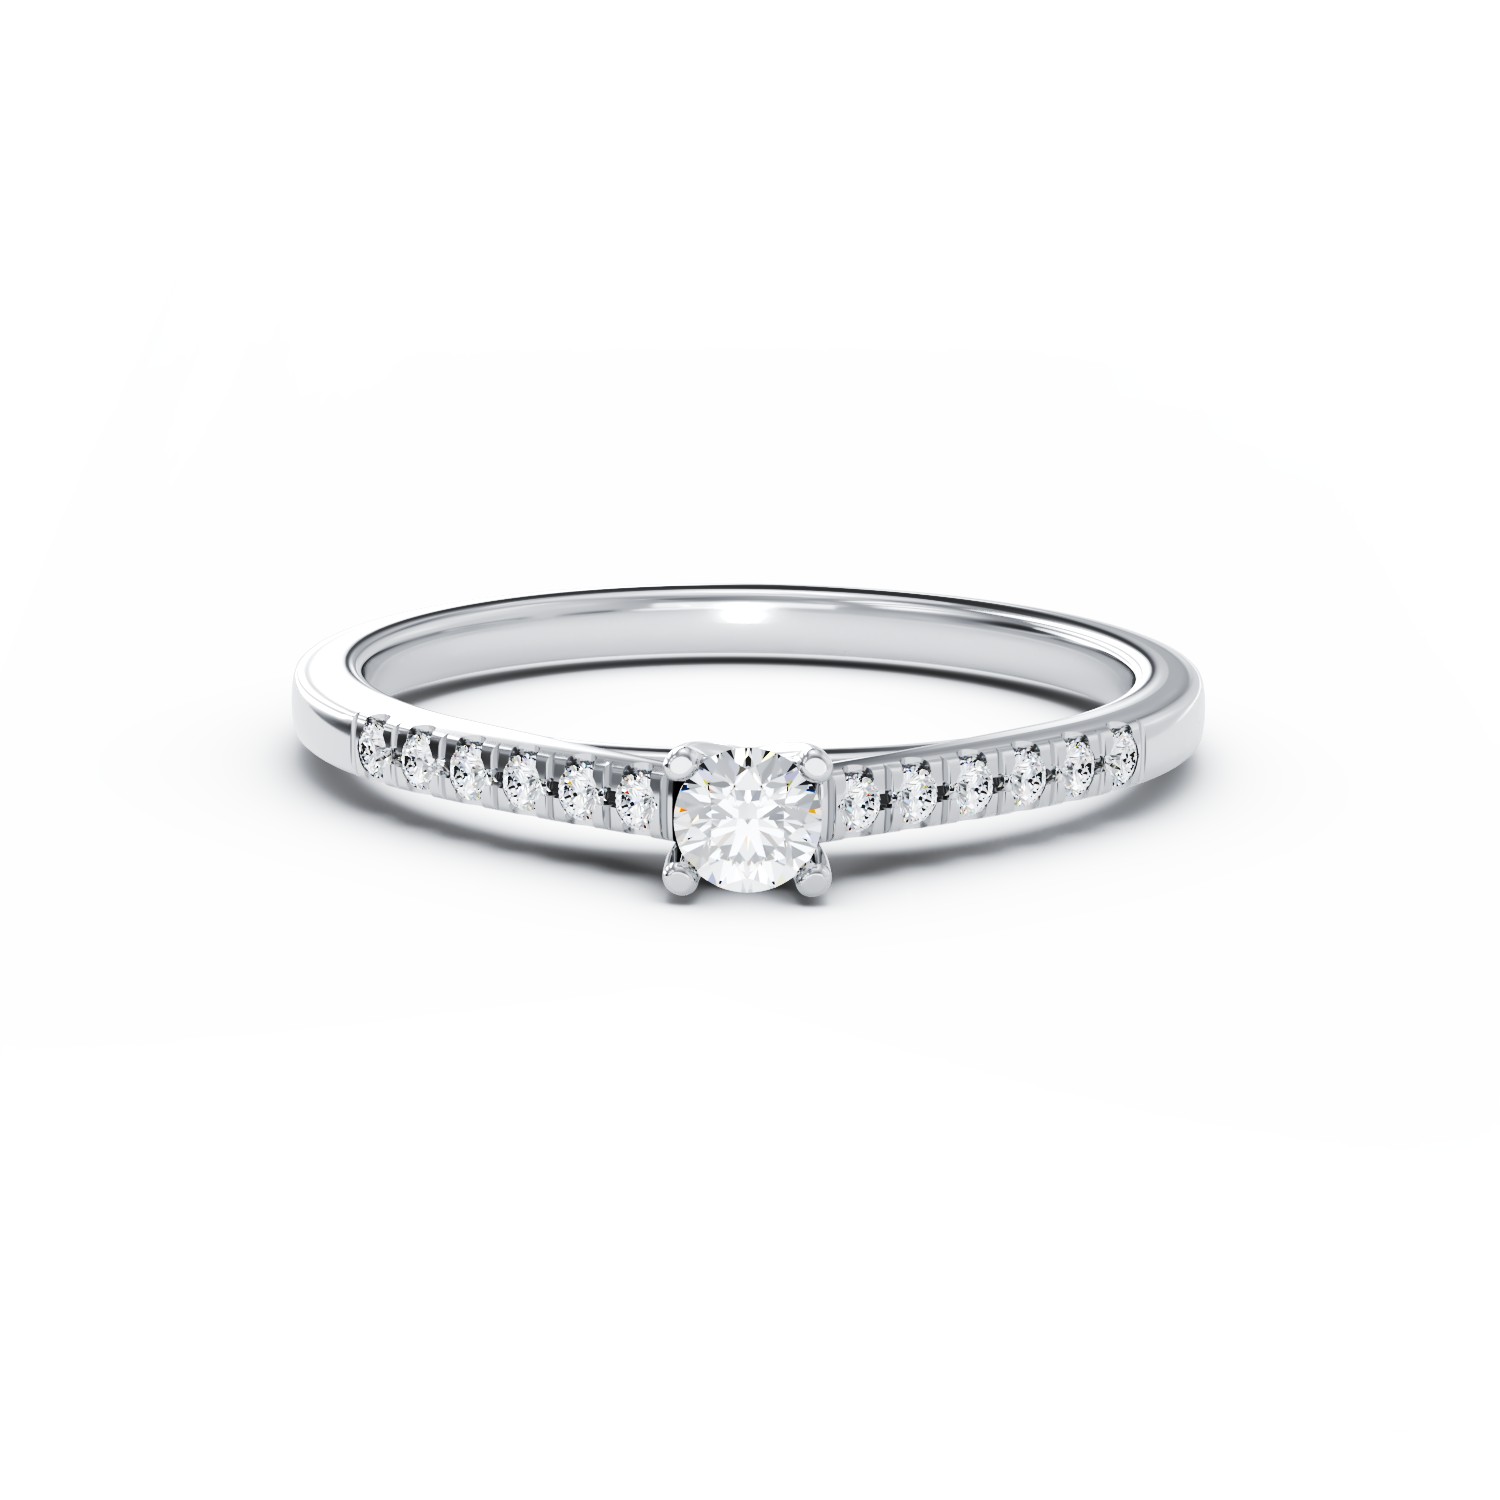 18K white gold engagement ring with 0.3ct diamond and 0.13ct diamonds